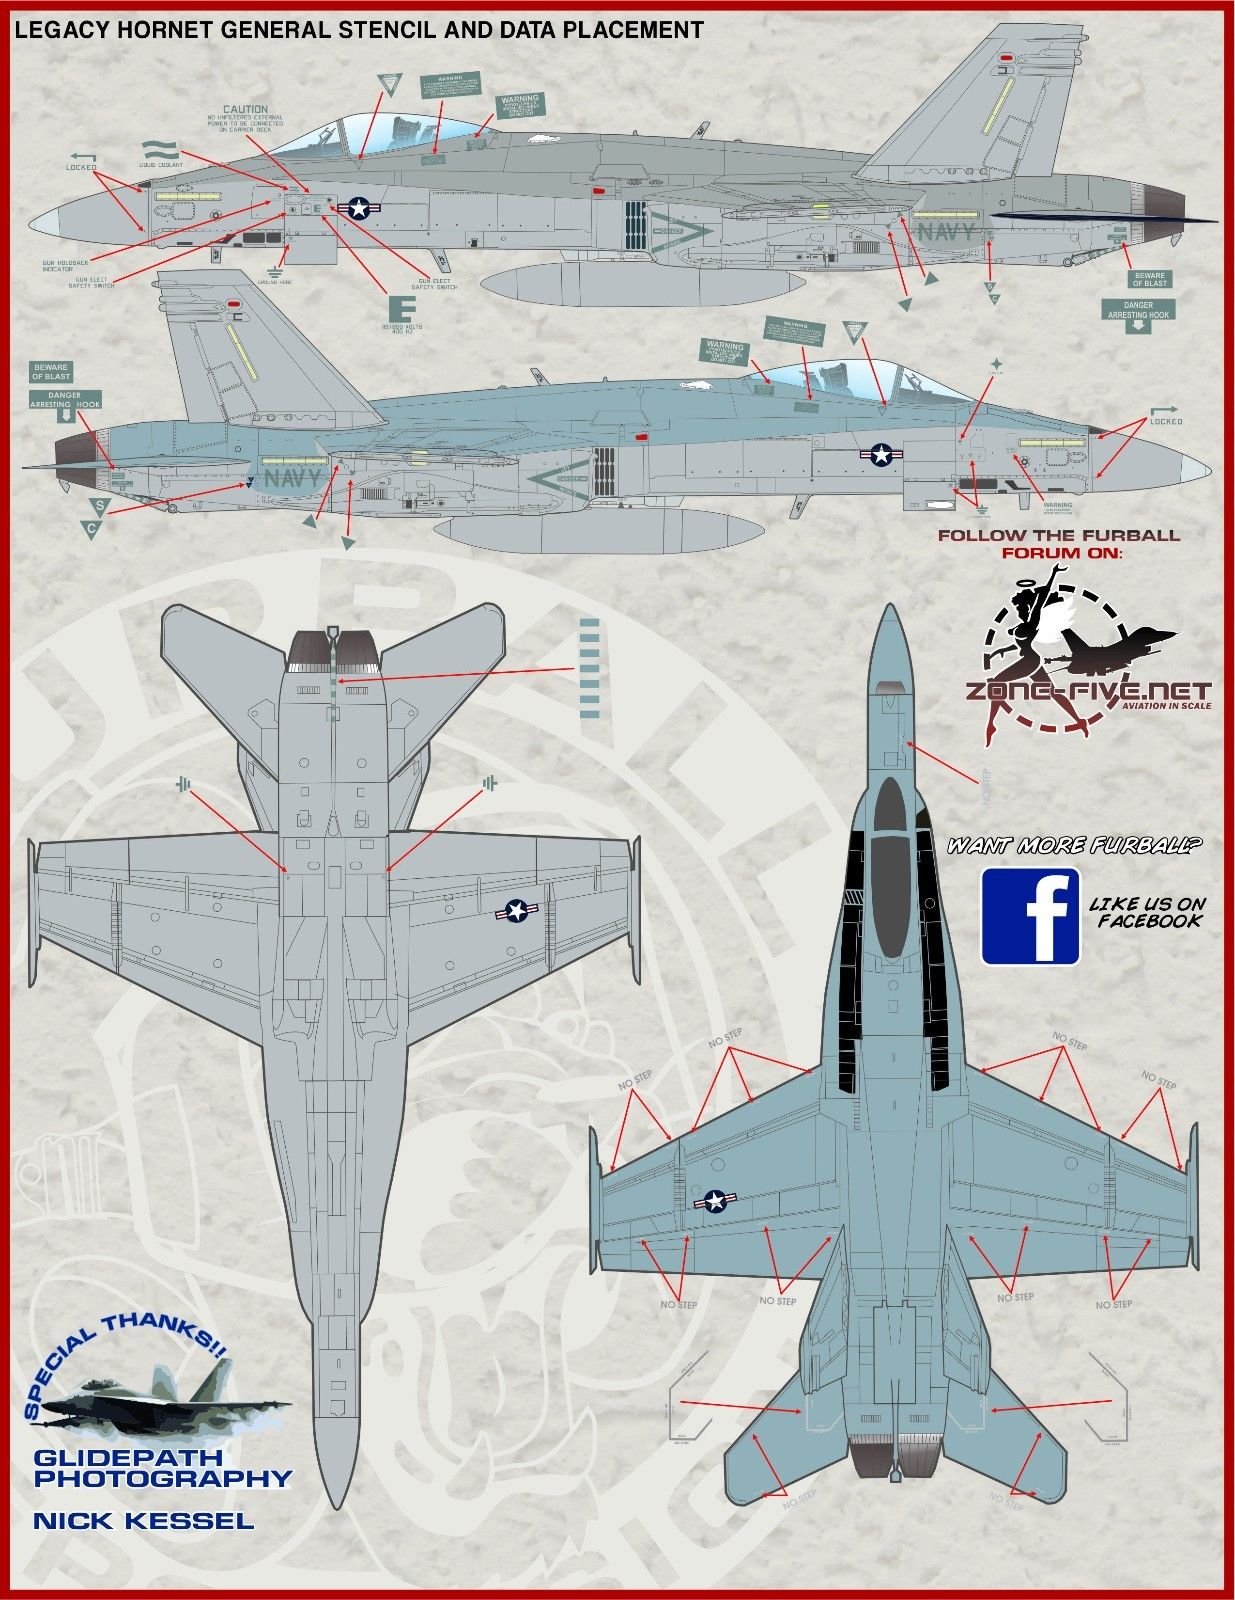 1/48 F/A-18 Air Wing All-Stars: 2014 Oceana Airshow Review - Click Image to Close